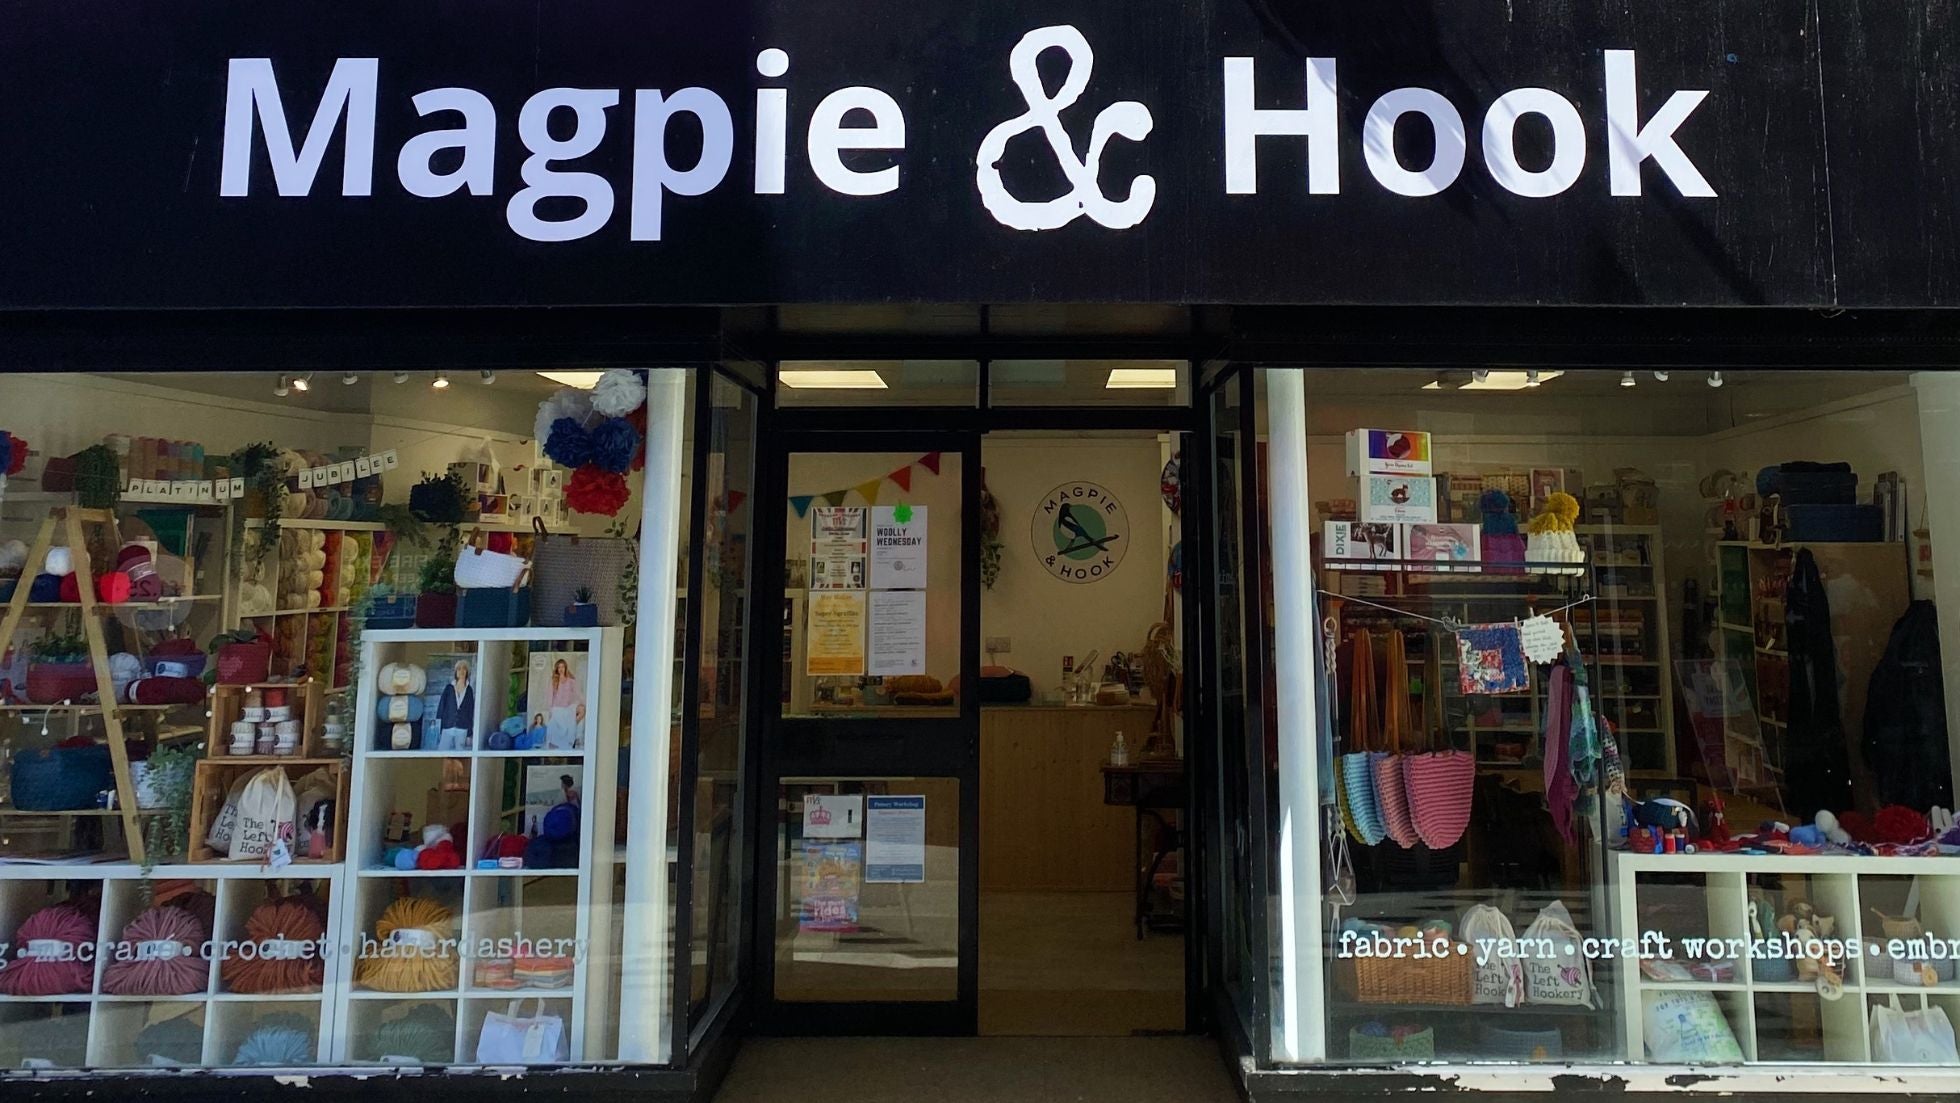 Hello and Welcome to Magpie & Hook